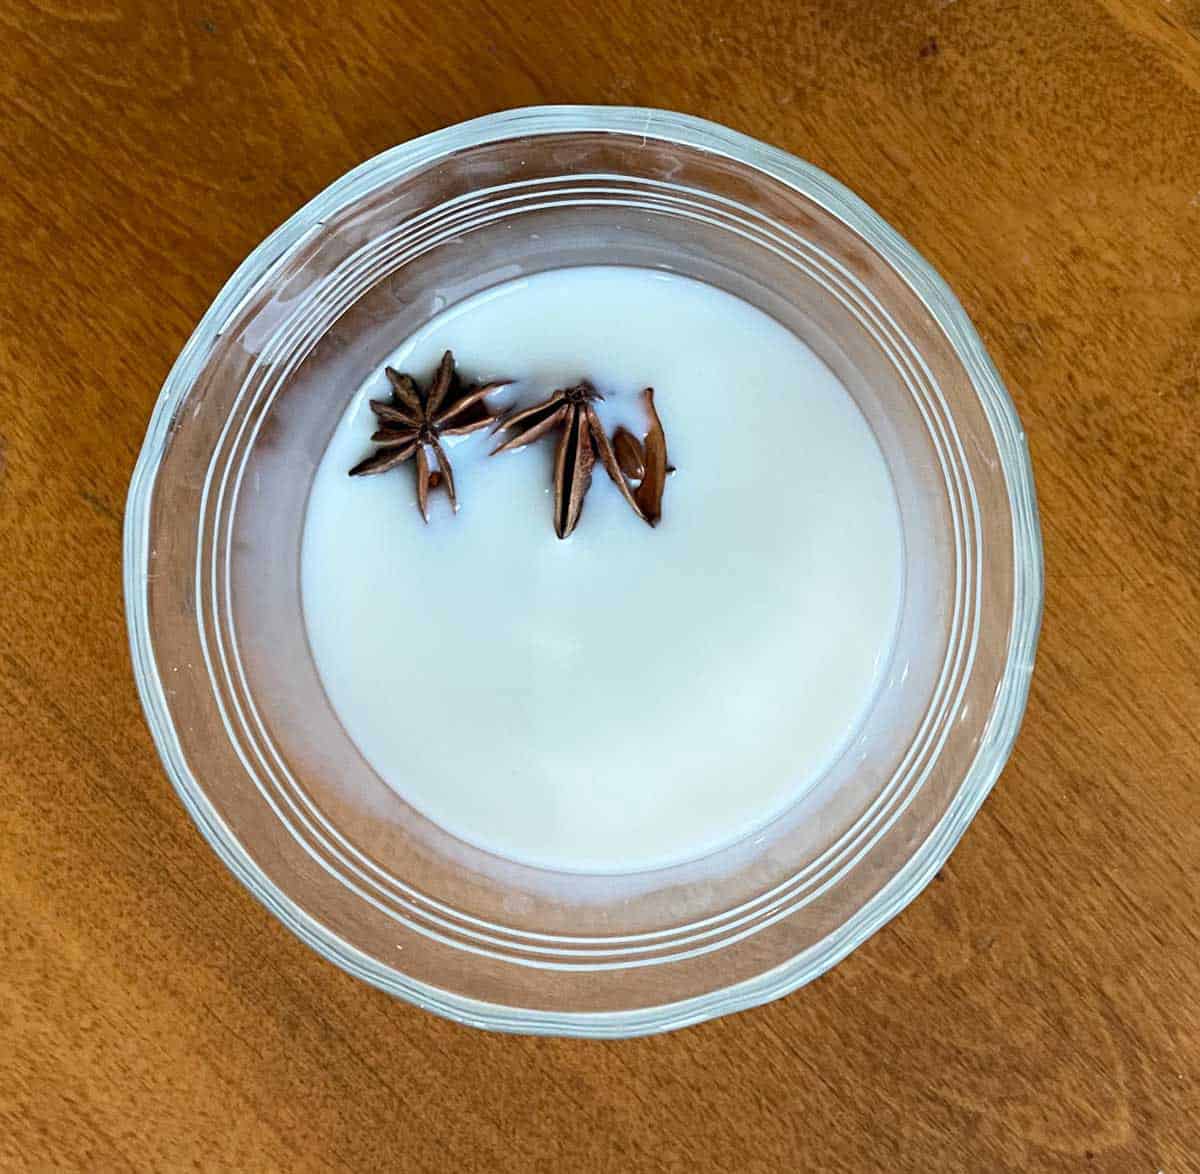 A bowl of milk that has 3 anise stars in it to give it flavor.